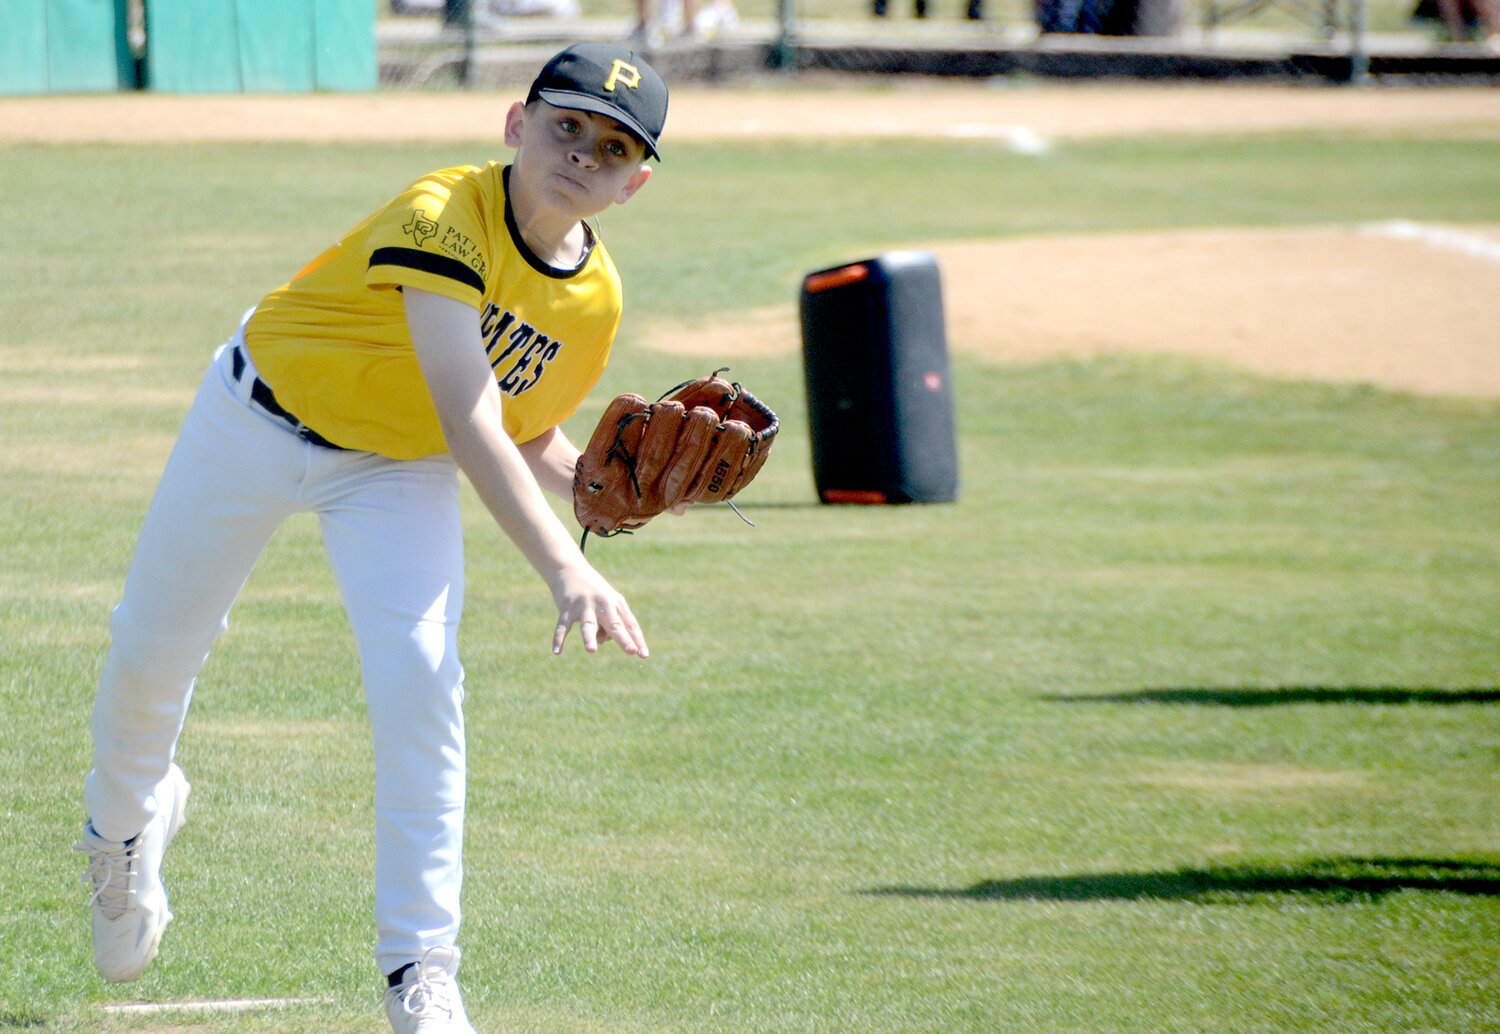 Parker Johnson pitches for the Pirates.